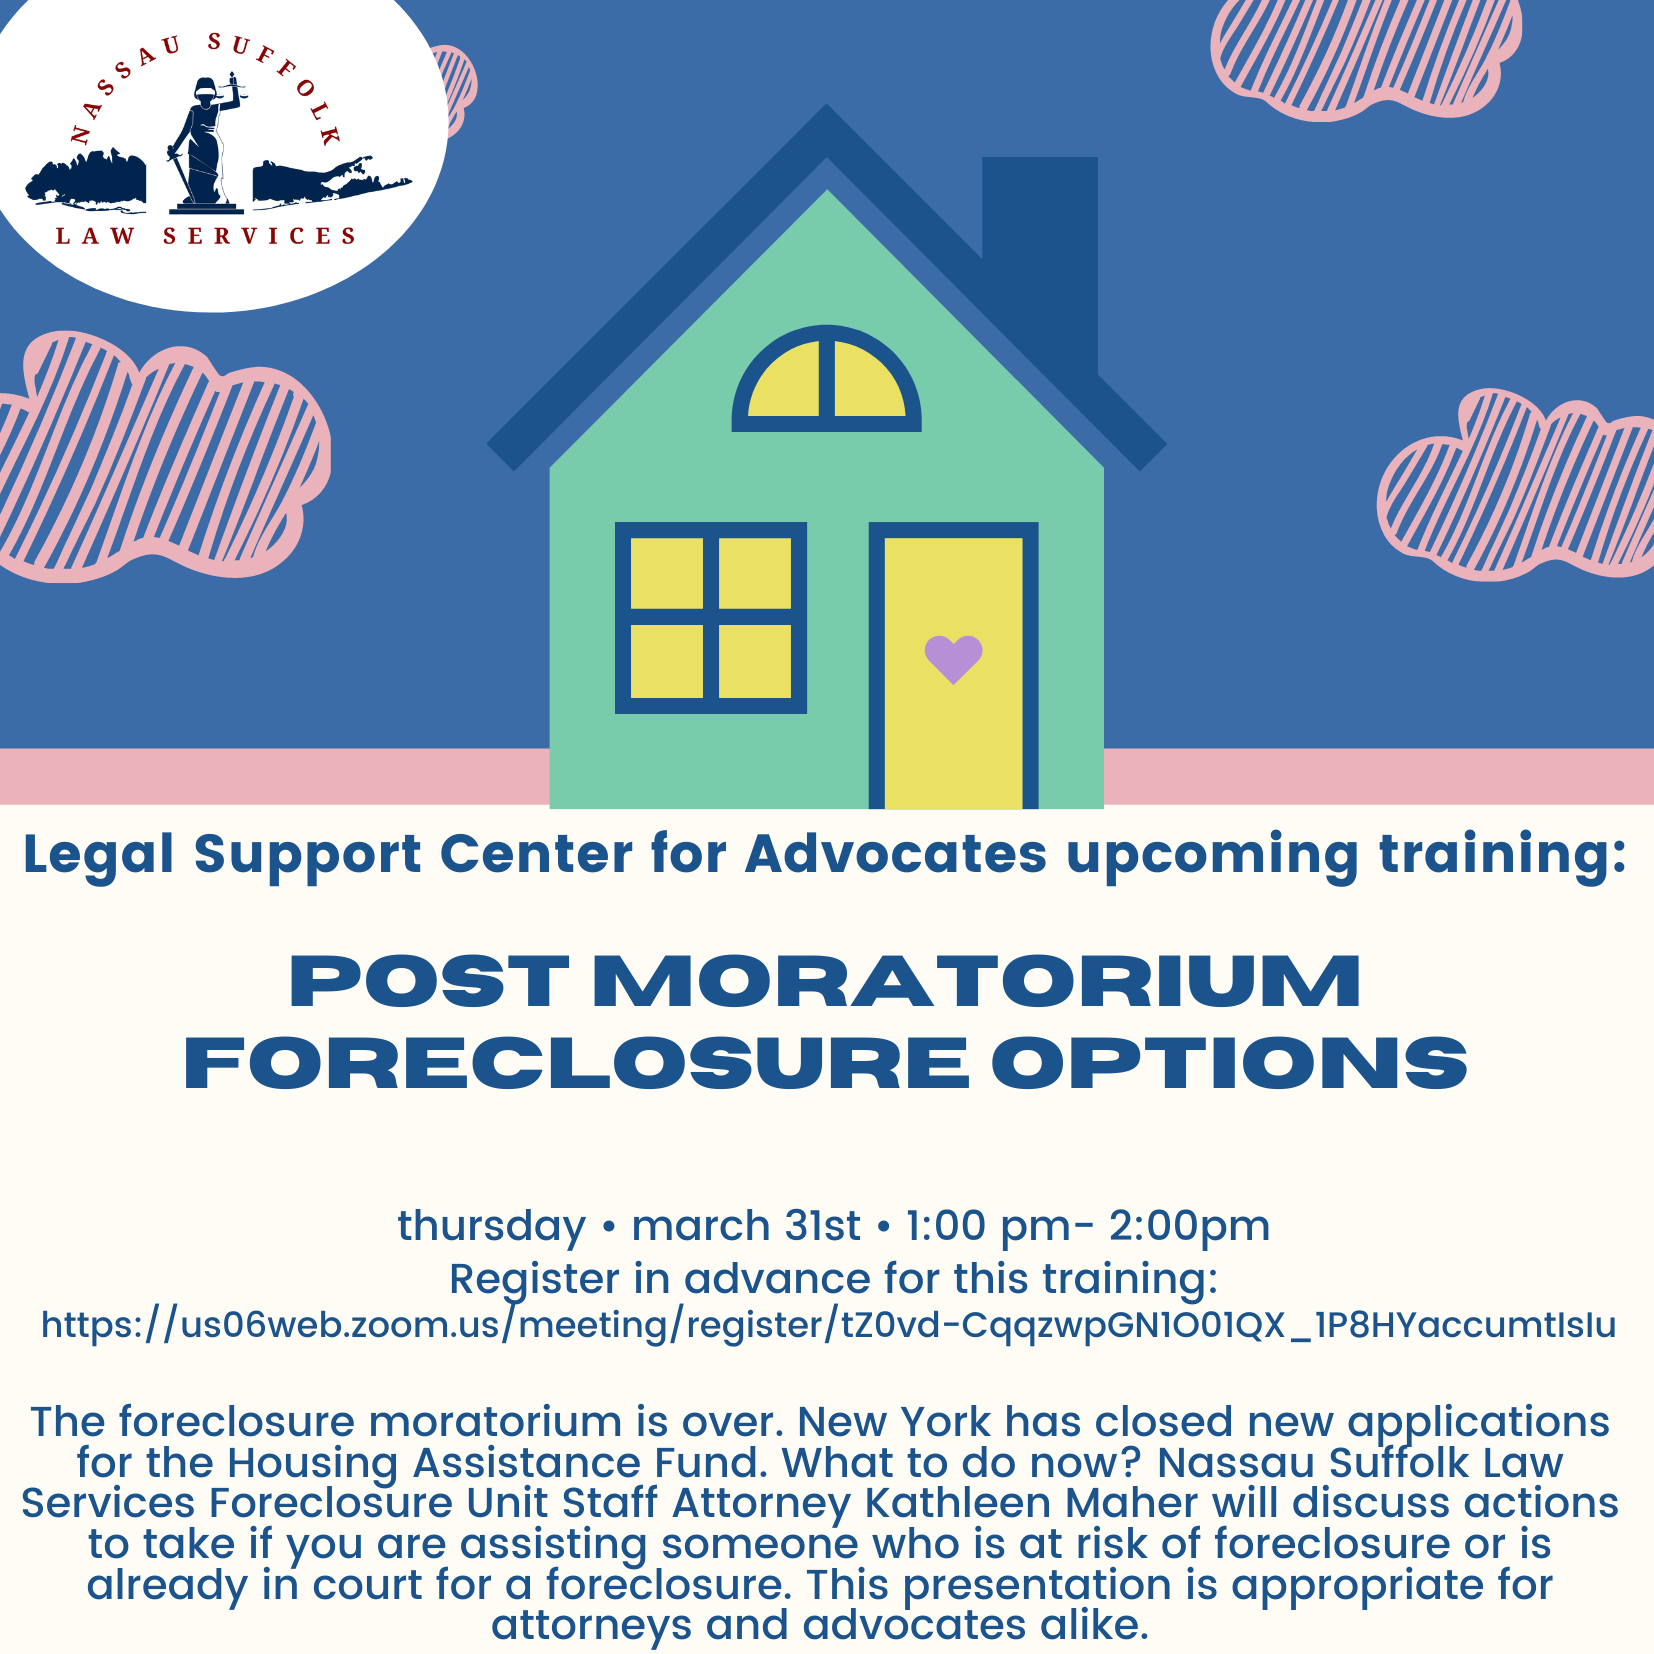 Post Moratorium Foreclosure Options The foreclosure moratorium is over. New York has closed new applications for the Housing Assistance Fund. What to do now? Nassau Suffolk Law Services Foreclosure Unit Staff Attorney Kathleen Maher will discuss actions to take if you are assisting someone who is at risk of foreclosure or is already in court for a foreclosure. This presentation is appropriate for attorneys and advocates alike. Mar 31, 2022 01:00 PM